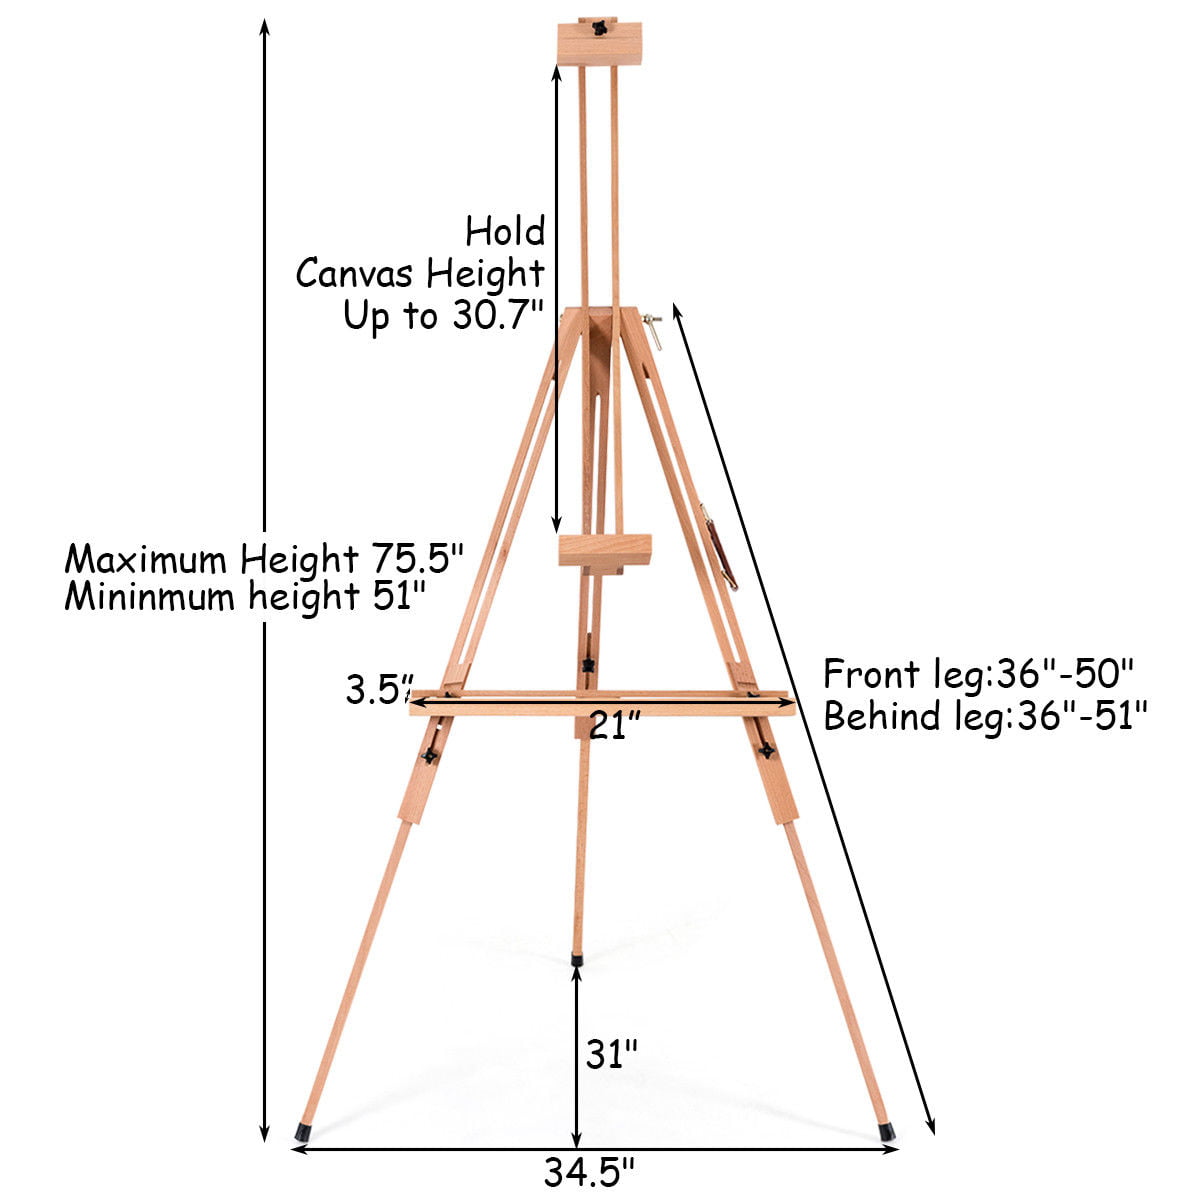 Floor Easel Stand for Painting Height Adjustable Large Beech Wood Painting Easel 51 to 75.5 Foldable and Tilting Design with Adjustable Tray Display Artist Easel Sketching TANGKULA Tripod Easel 